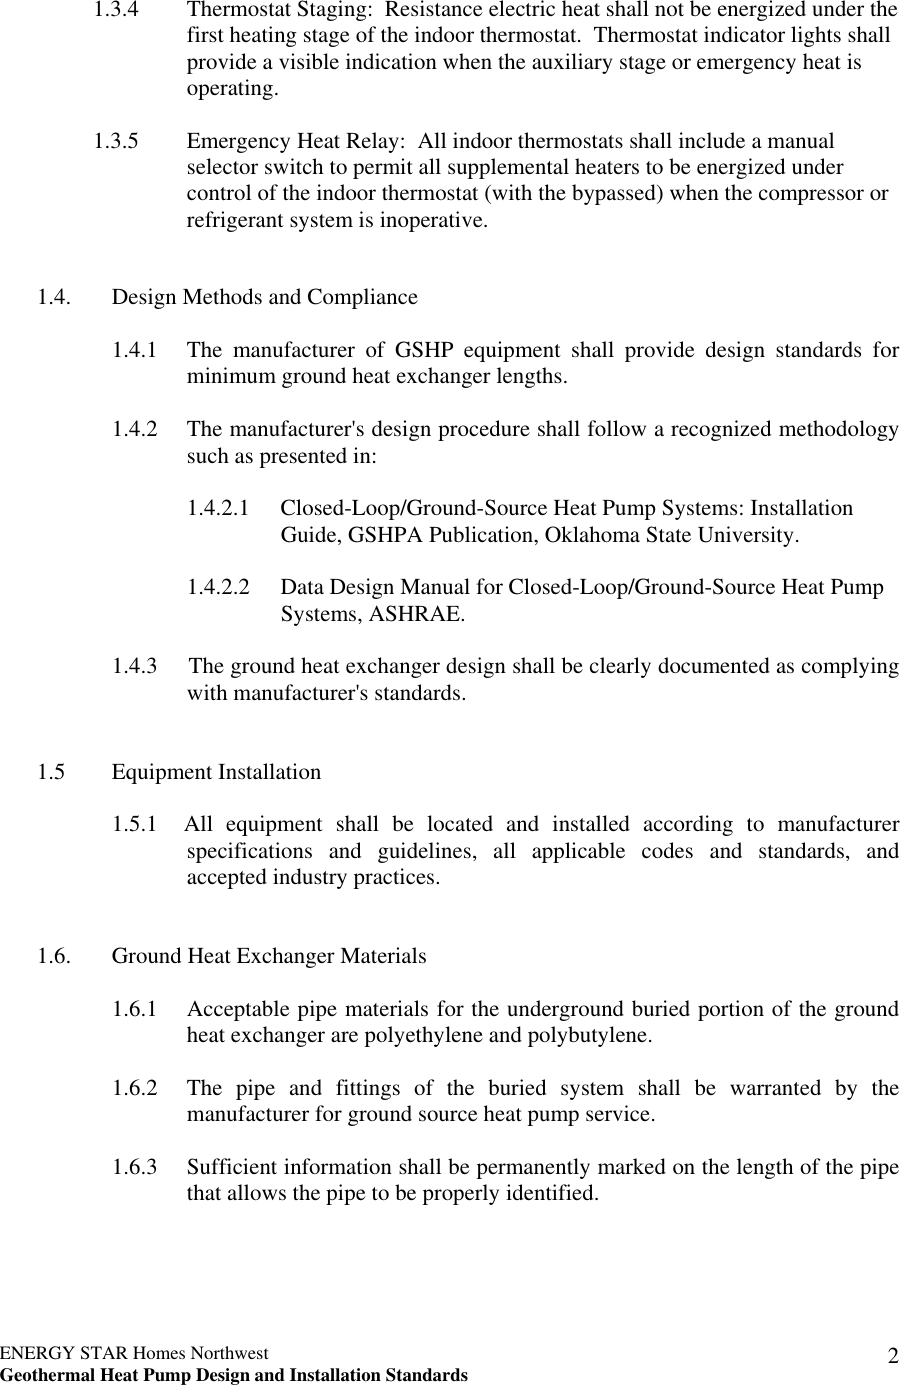 Page 4 of 9 - Energy-Tech-Laboratories Energy-Tech-Laboratories-Homes-Northwest-Users-Manual ESHNW GSHP Supplemental SPECS_04-20-05